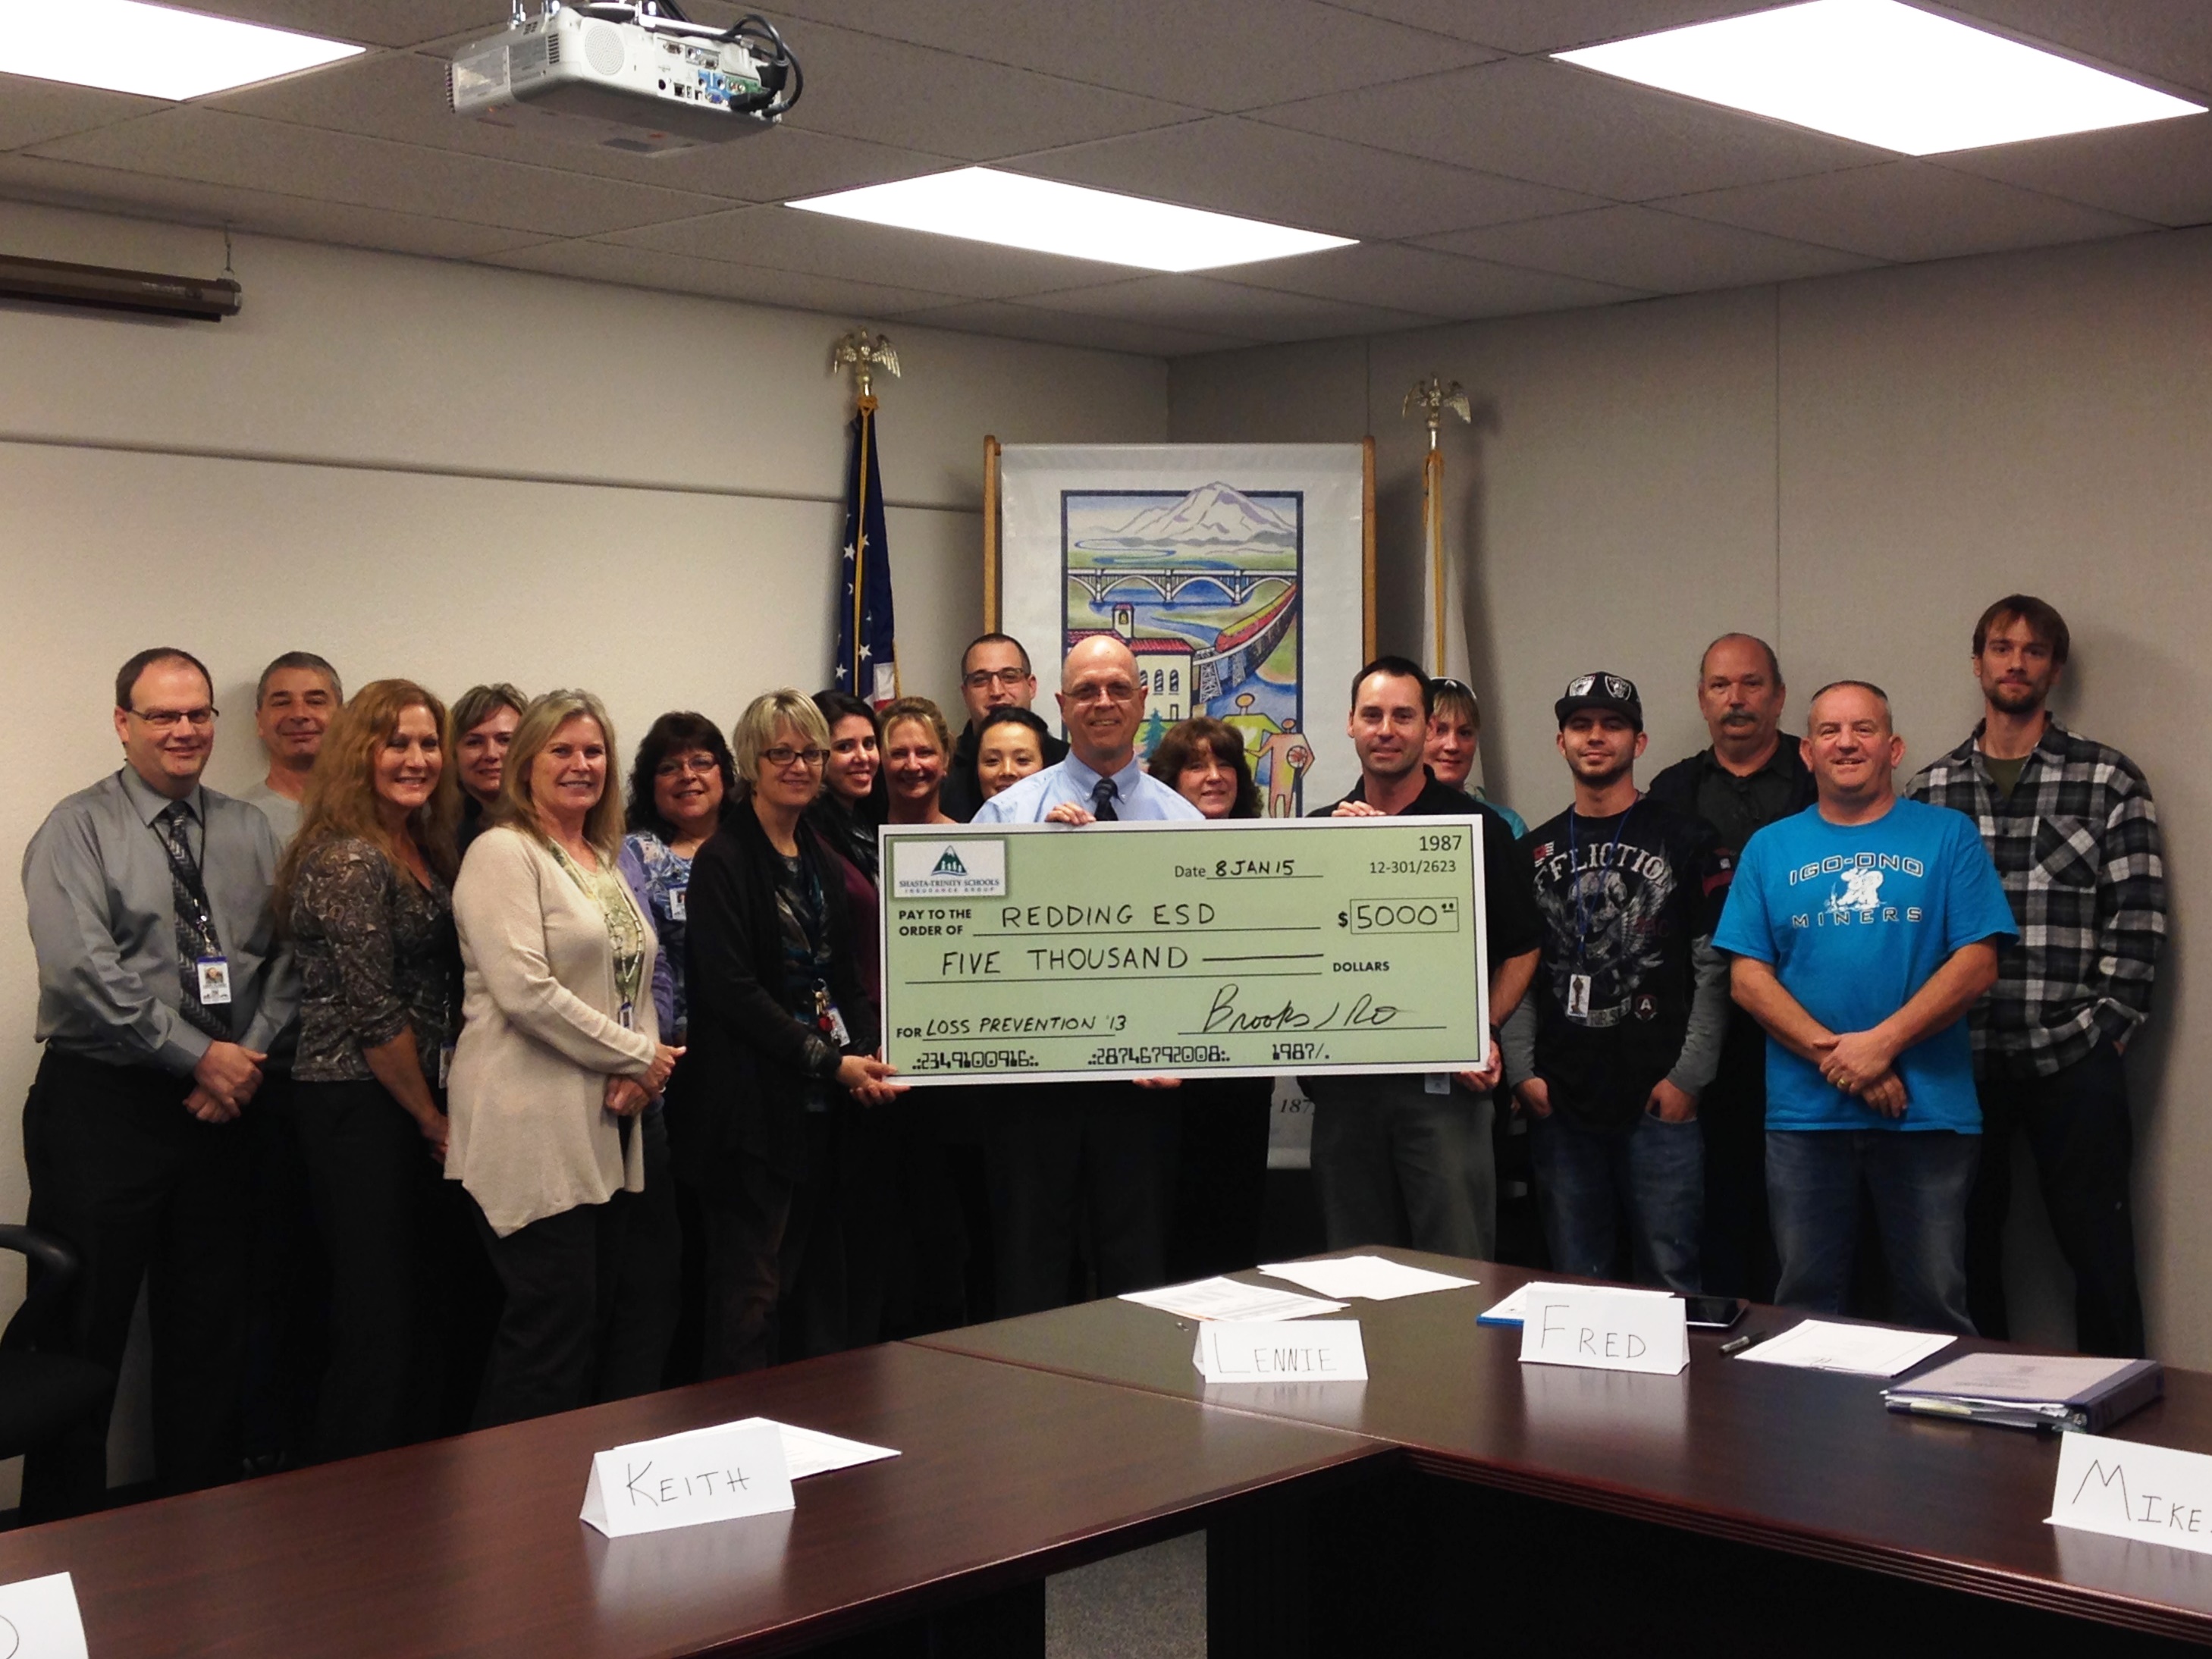 Employees of Redding Elementary with large check